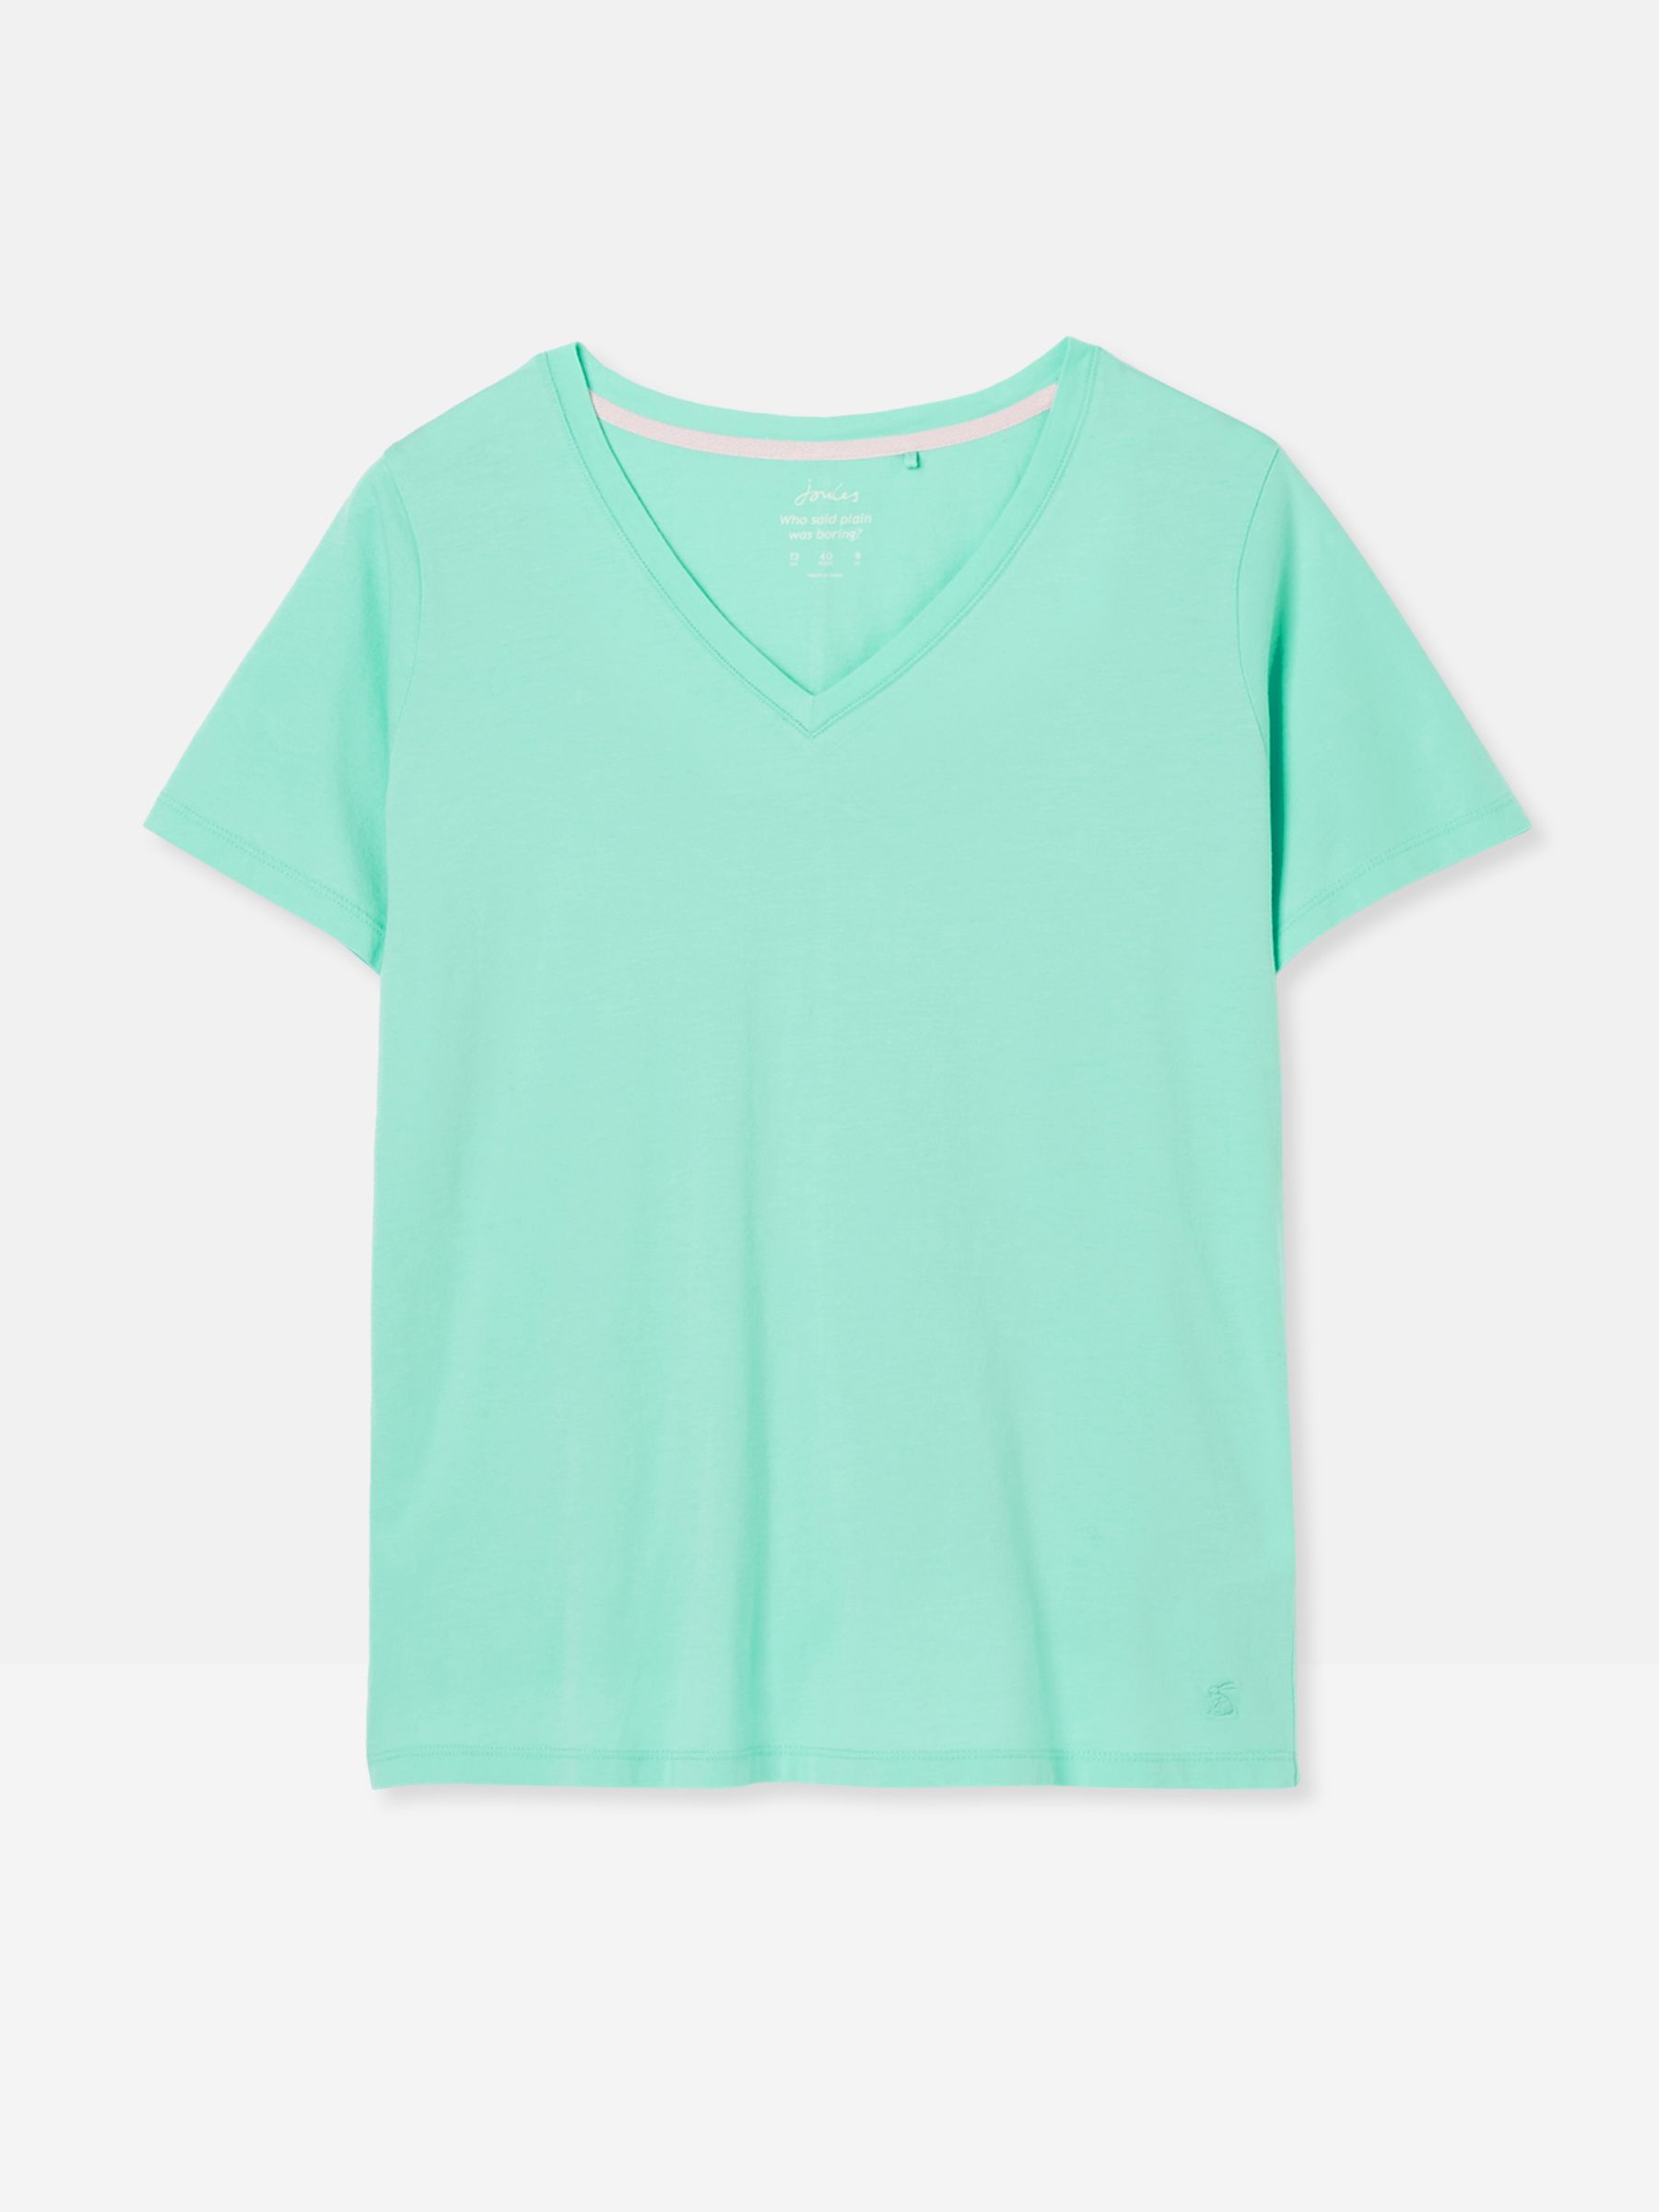 Buy Joules Emily V Neck T-shirt from the Joules online shop